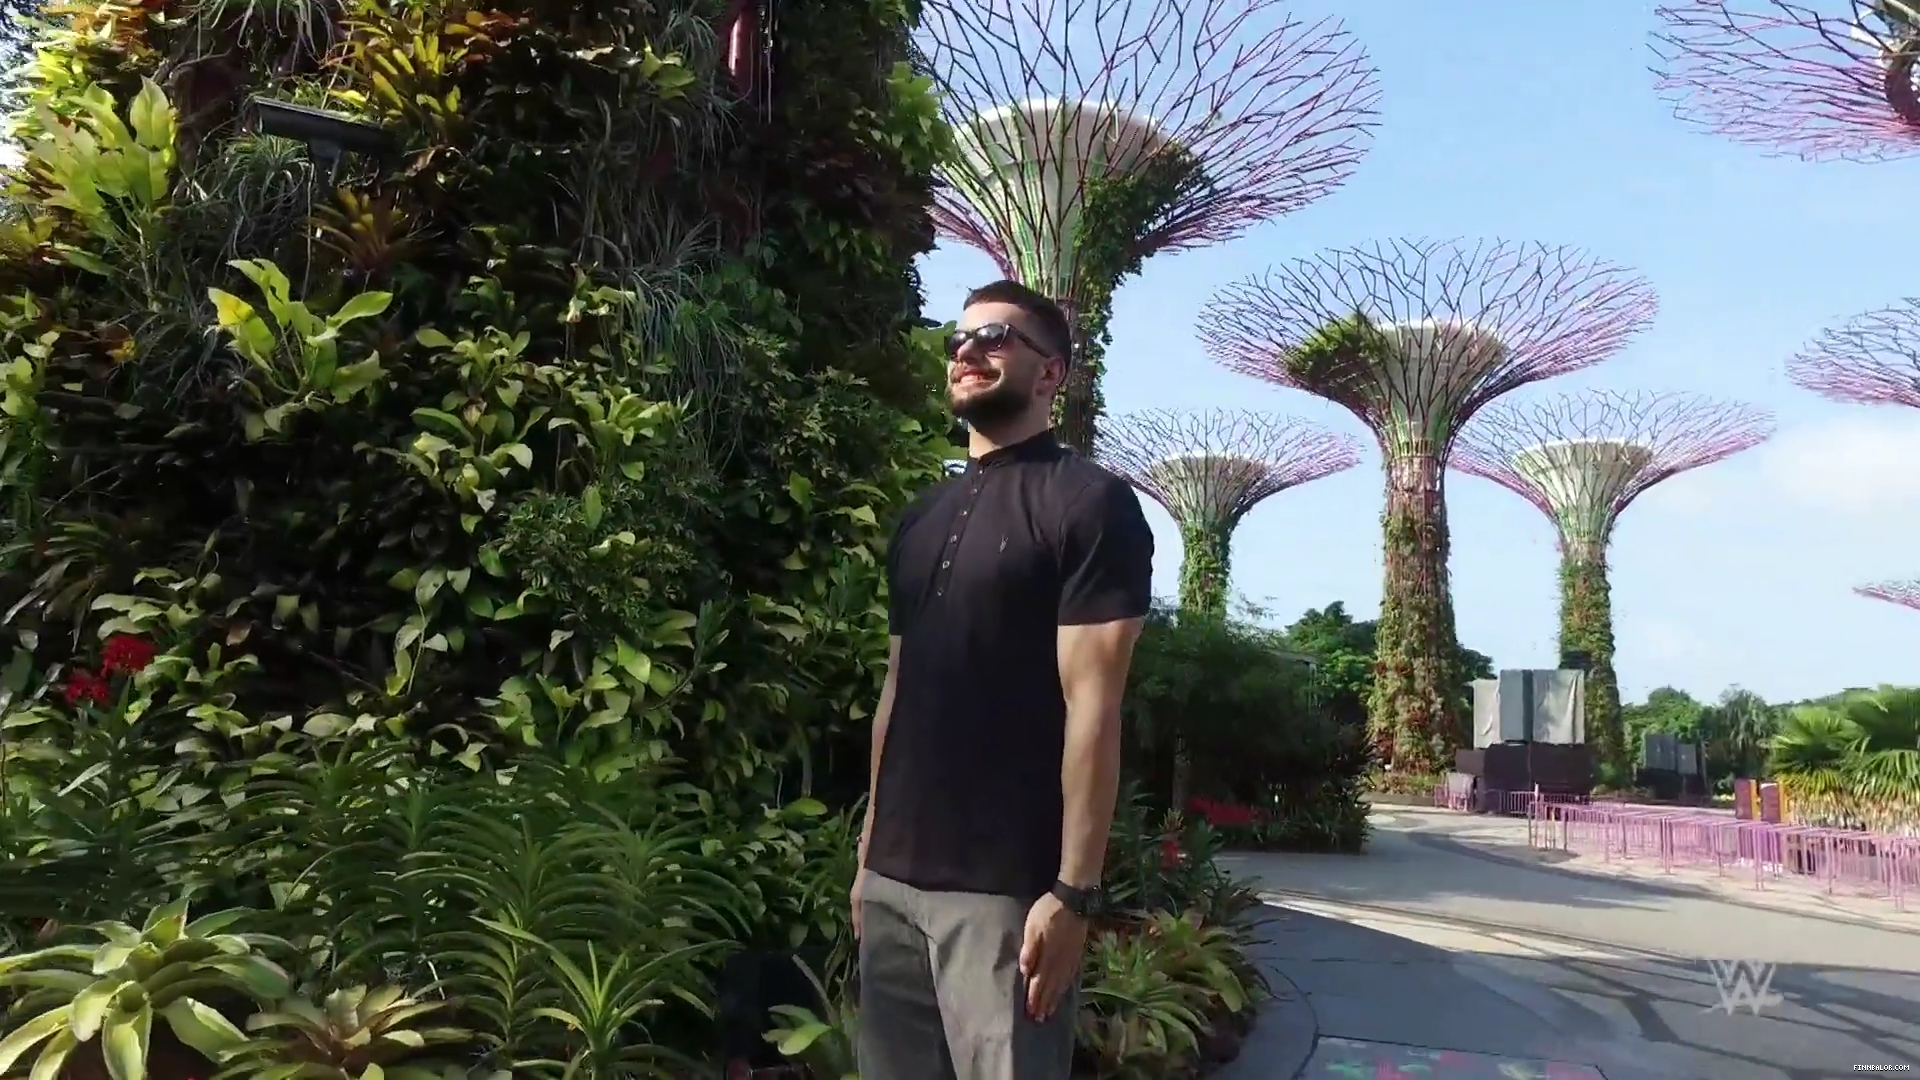 Finn_Balor_feels_like_he_is_in__Star_Wars__while_touring_Singapore_s_Supertree__mp40001.jpg